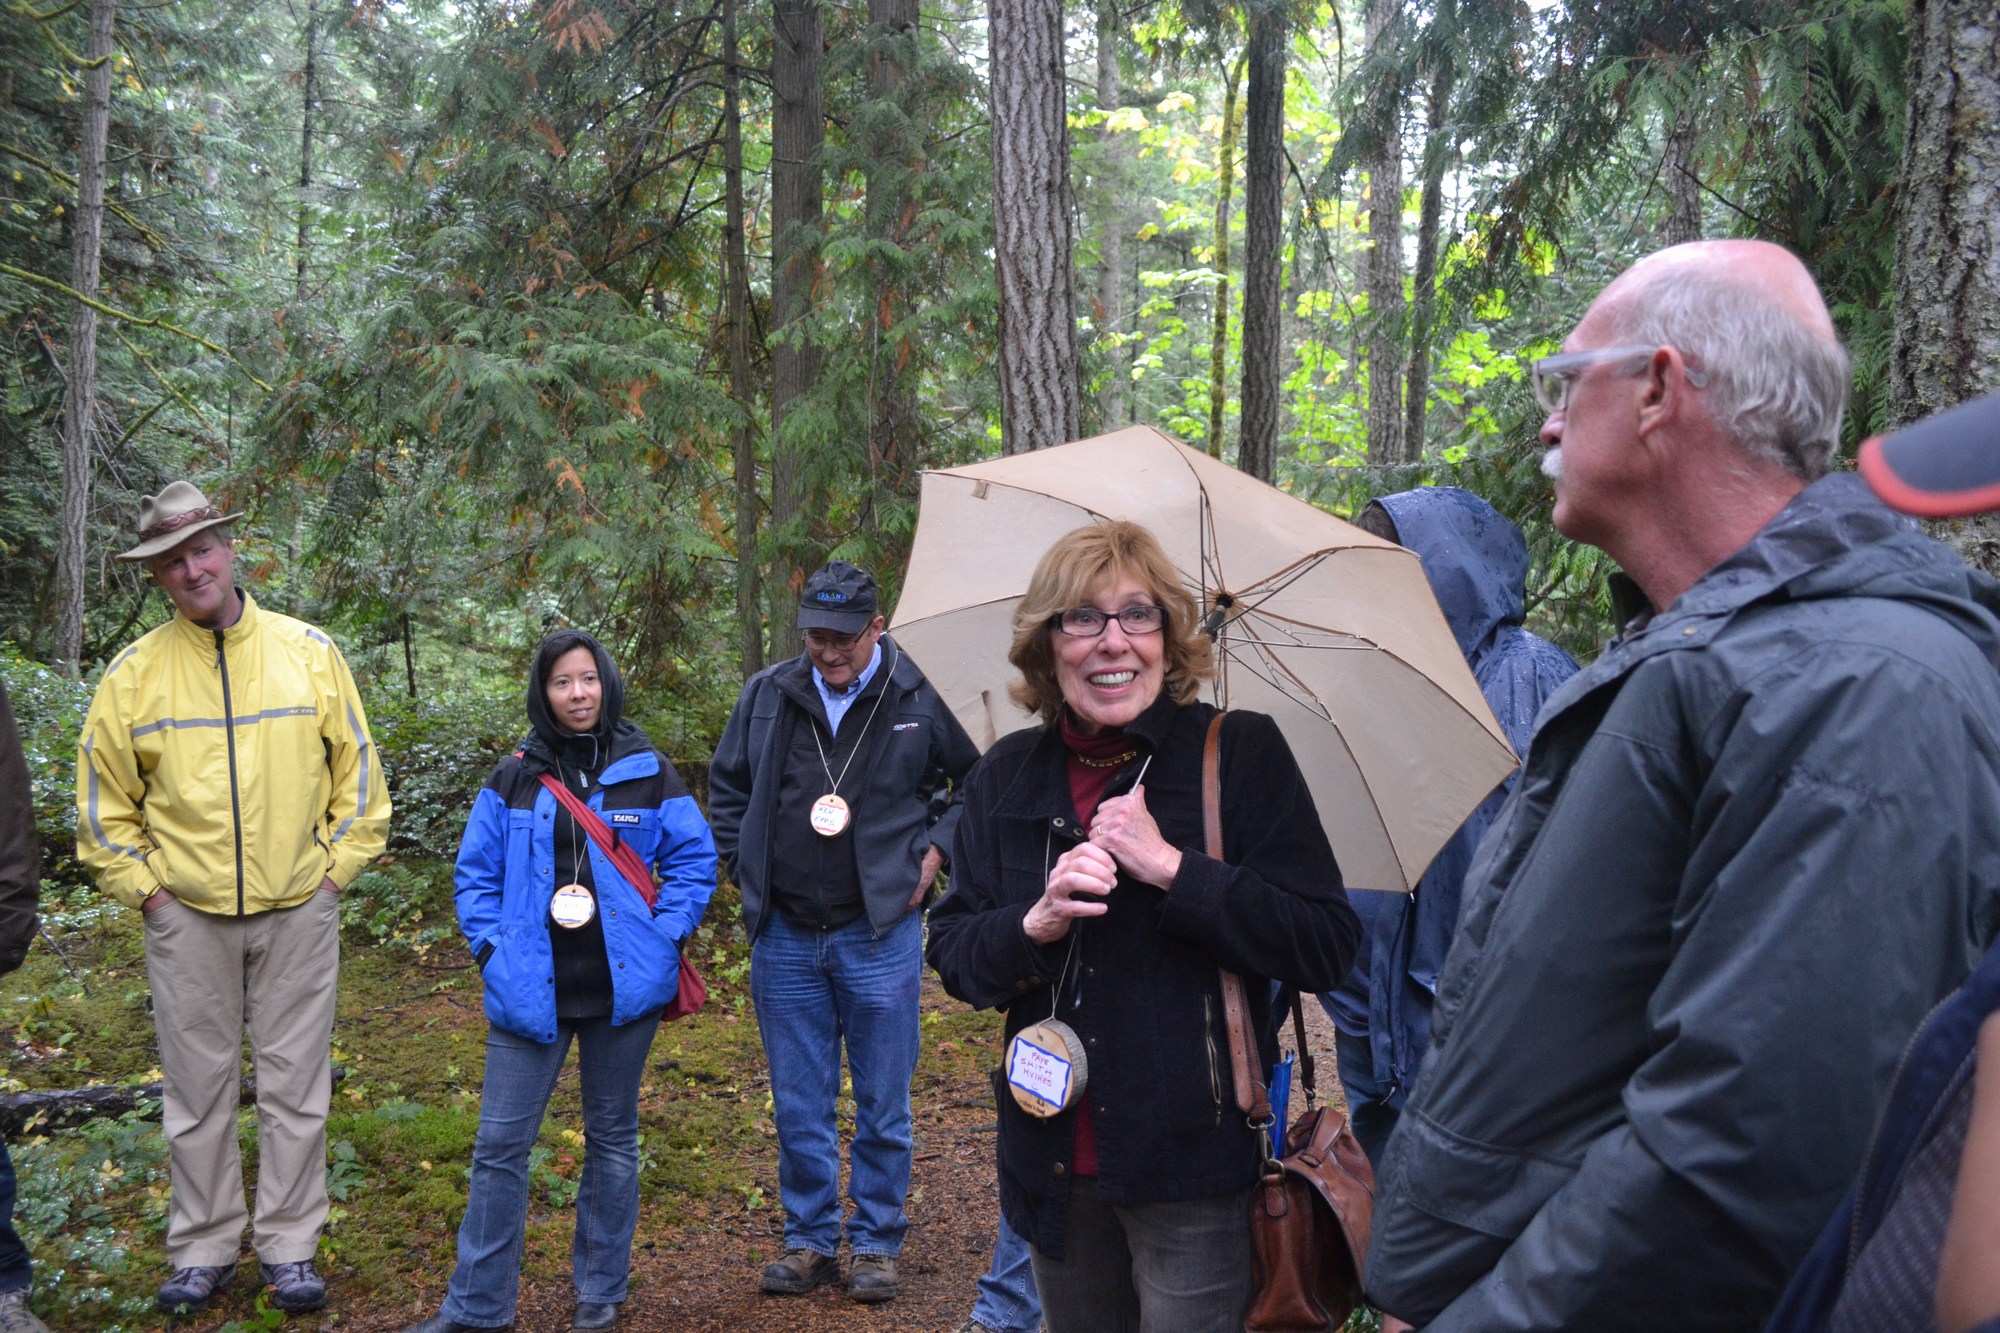 Faye Smith (and Gilles Wendling on right) at the Englishman River walkabout co-hosted by the Regional District of Nanaimo and the Nanoose FIrst Nation in September 2014